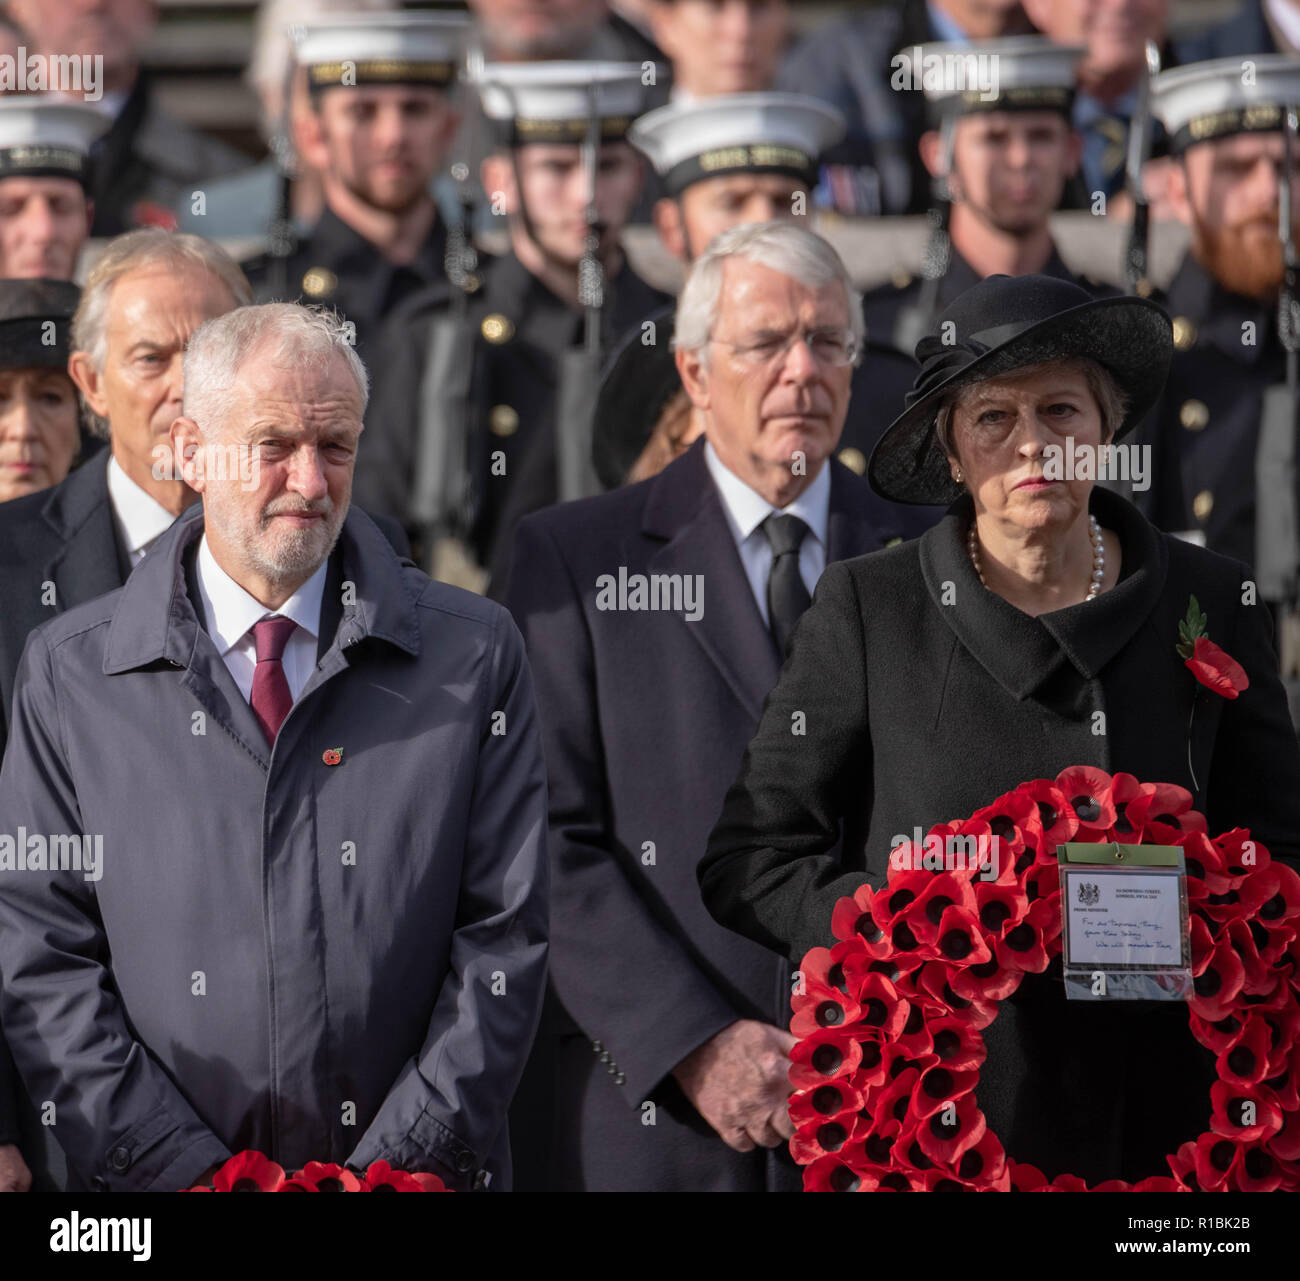 London UK, 11th November 2018  The National Service of Remembrance  at the Cenotaph London on Remembrance Sunday in the presence of HM The Queen, the Prime Minster, Theresa May, former prime ministers, senior government ministers  and representatives of the Commenwealth  Jeremy Corybn, Leader of the Laobur party in the center next to the Prime Minister, Theresa May  Credit Ian Davidson/Alamy Live News Stock Photo